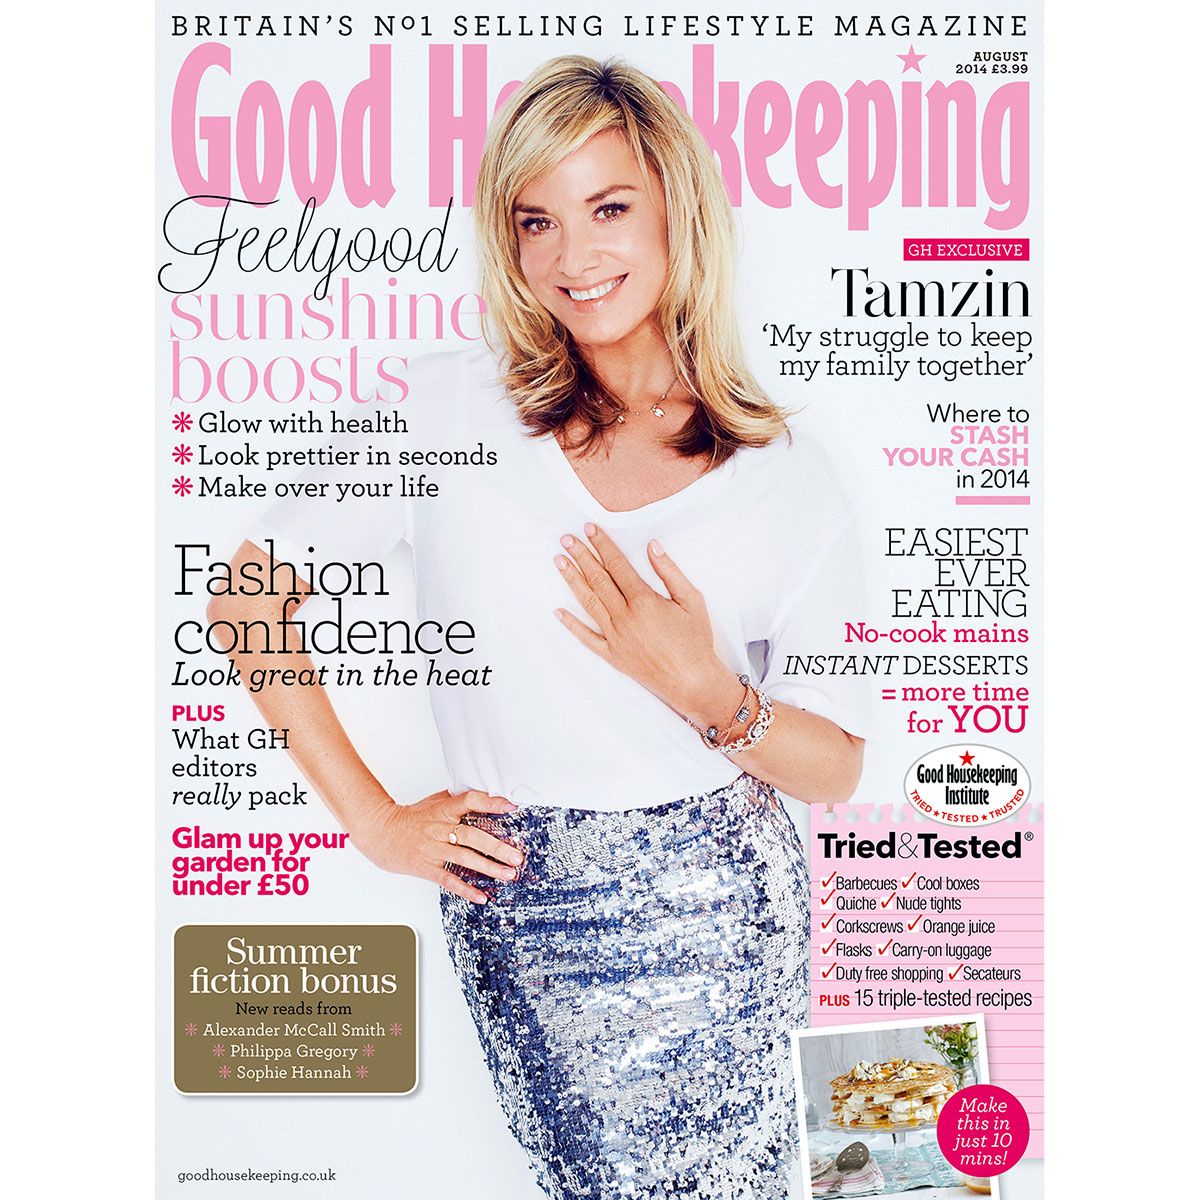 Favourite Good Housekeeping cover 2014 - Good Housekeeping